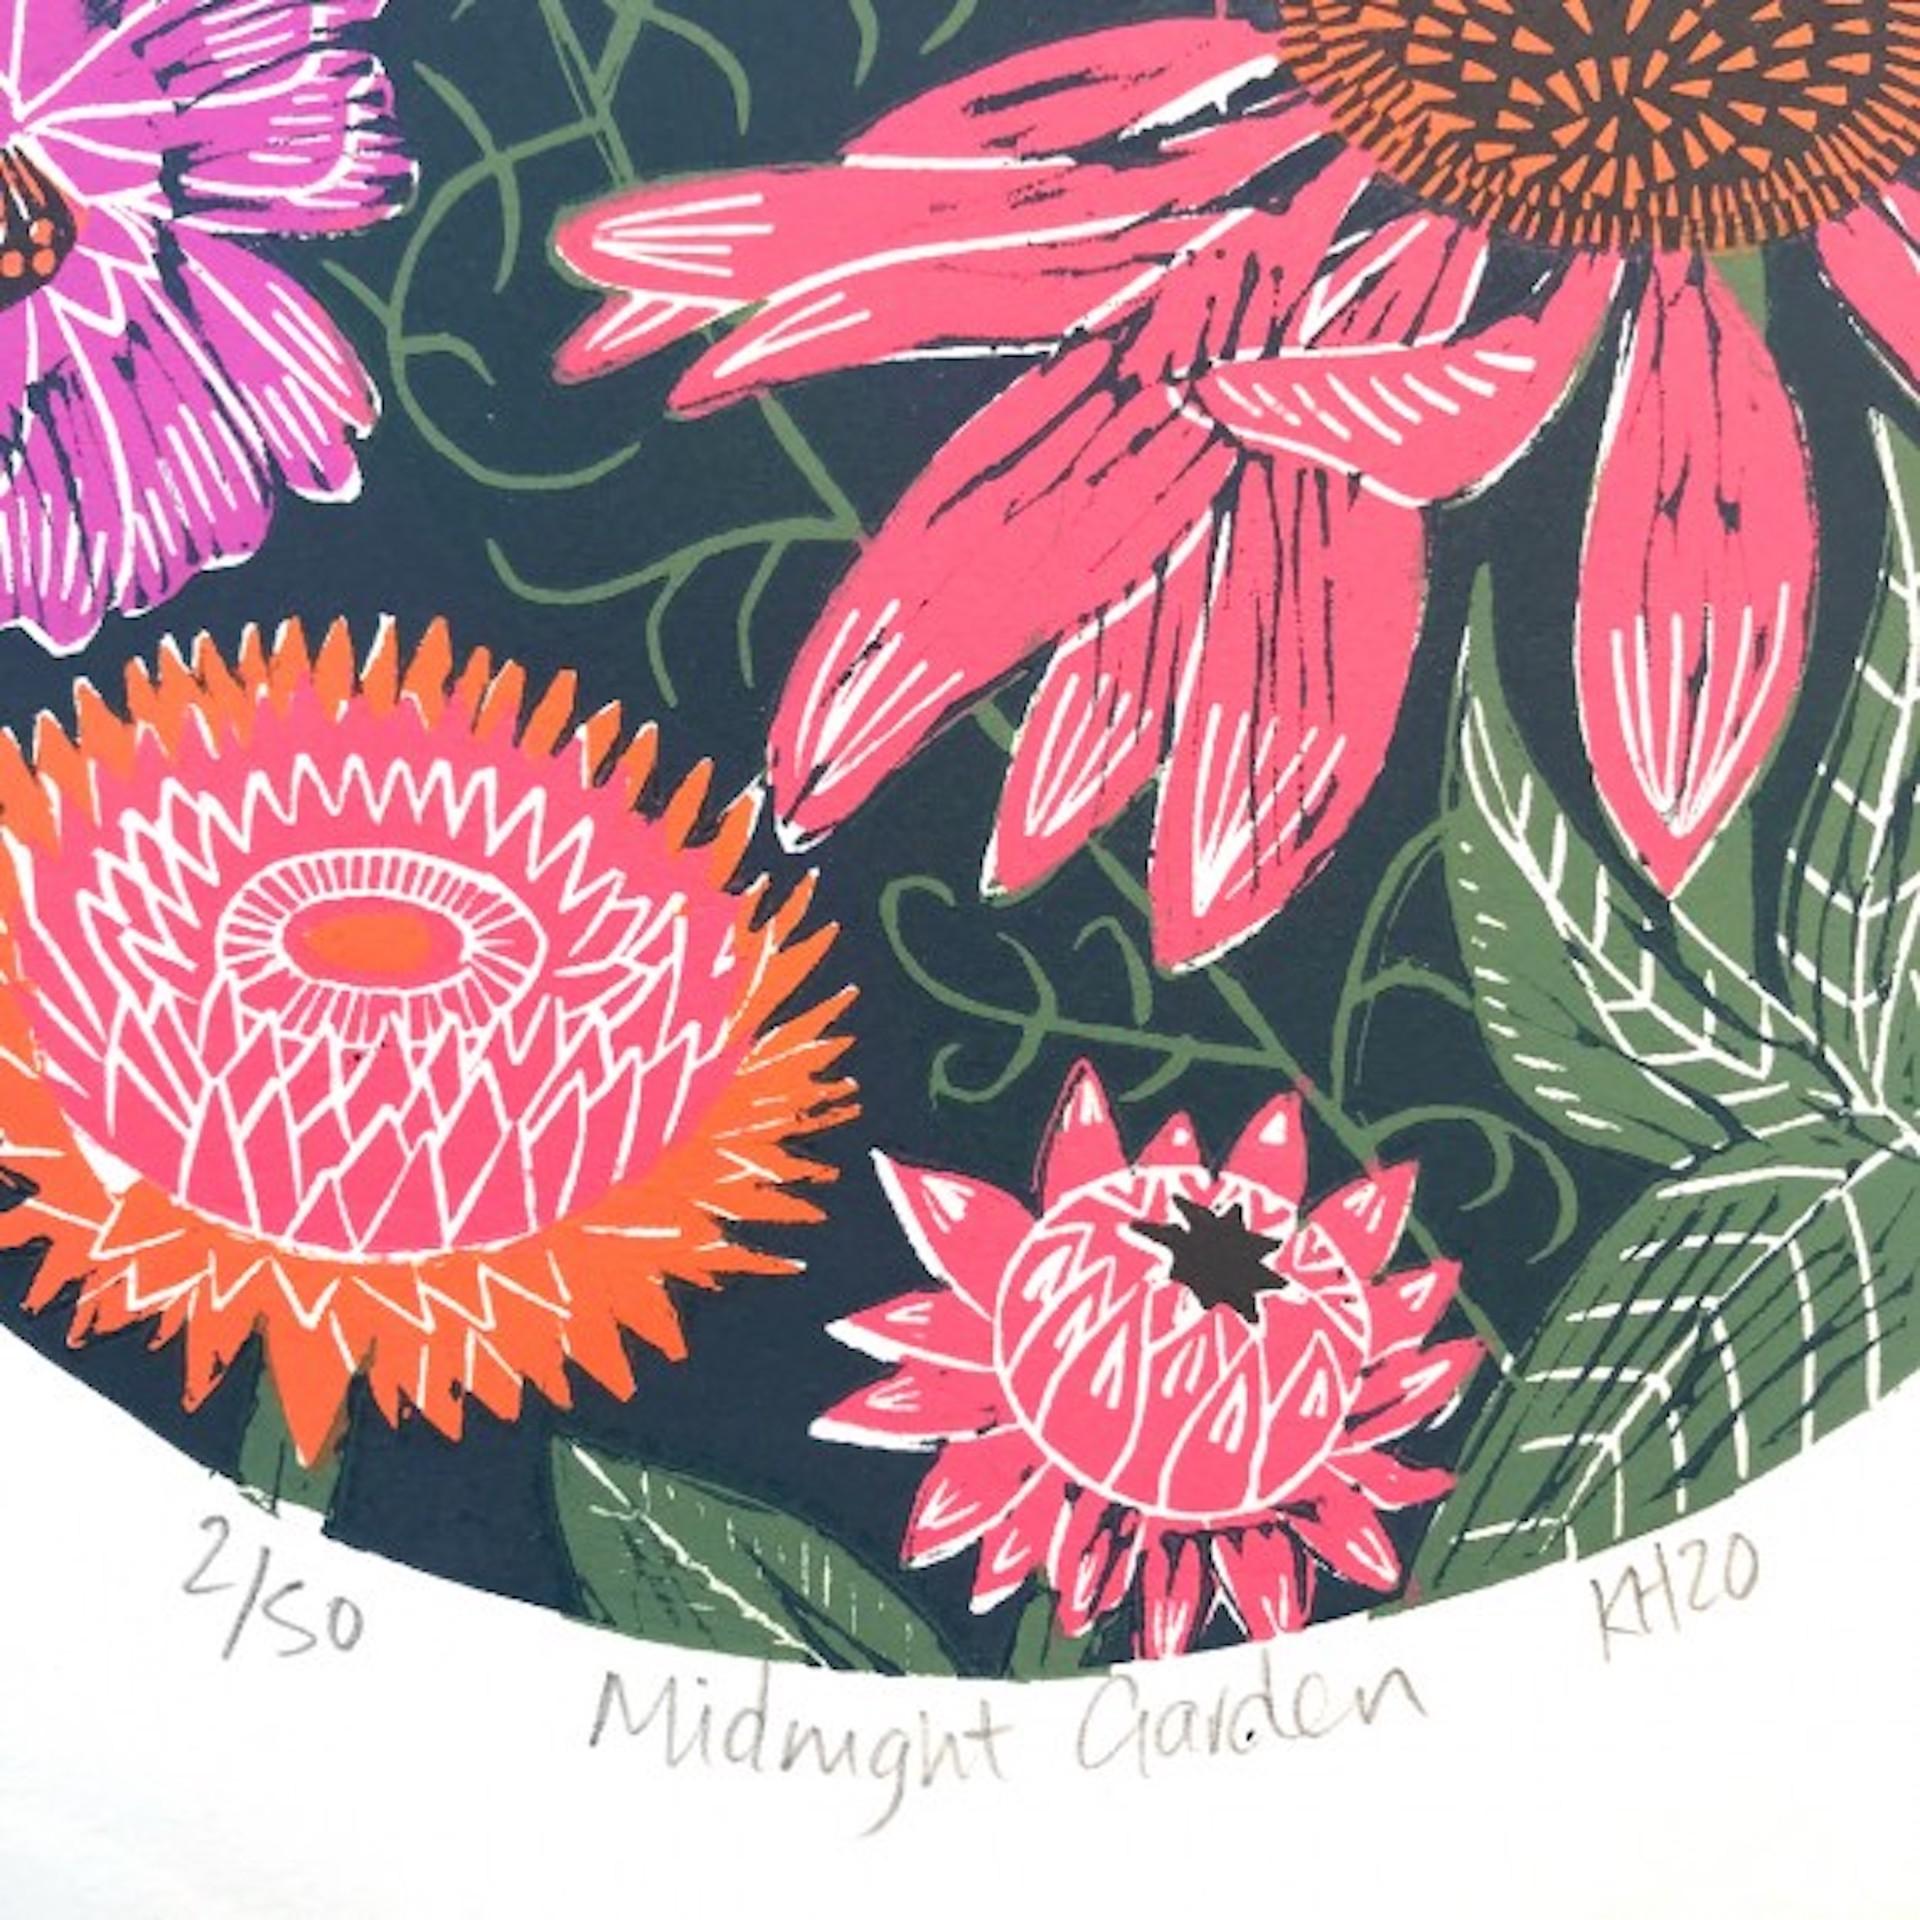 Kate Heiss, Midnight Garden, Floral Print, Limited Edition Print, Affordable Art For Sale 2